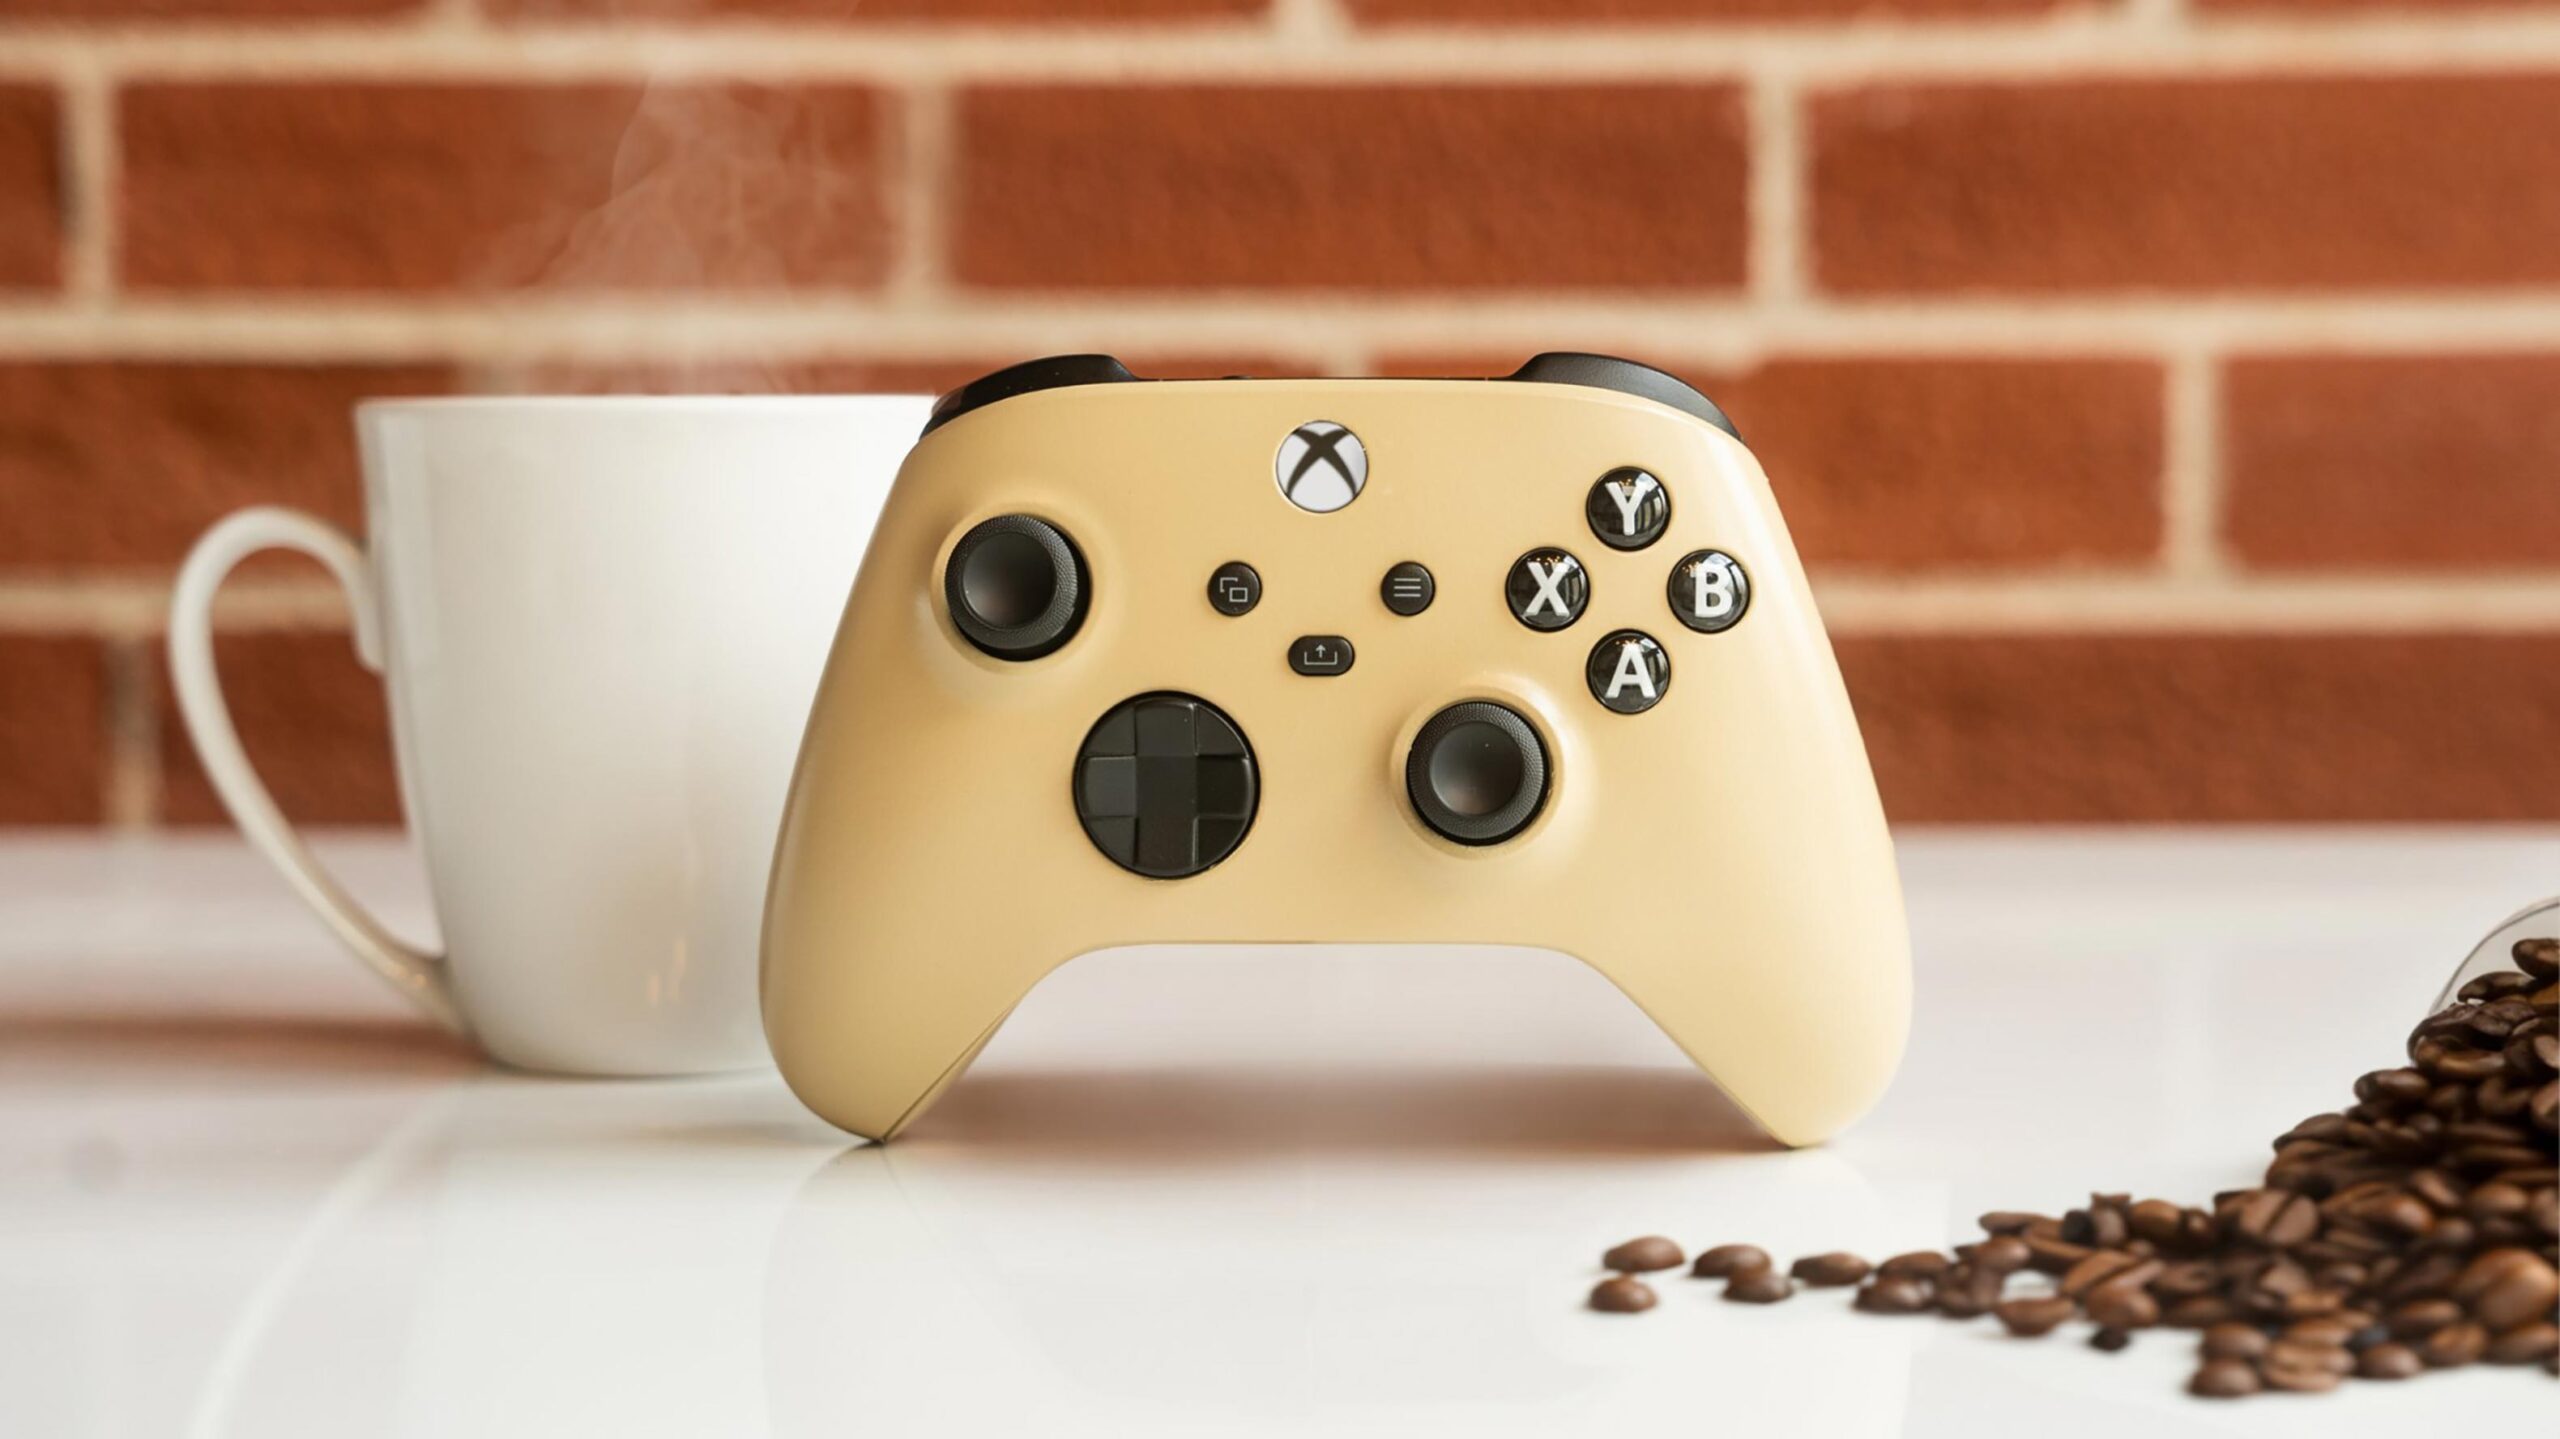 Xbox Canada’s ‘Double Double’ controller isn’t for sale, settle for Tim’s mediocre coffee instead